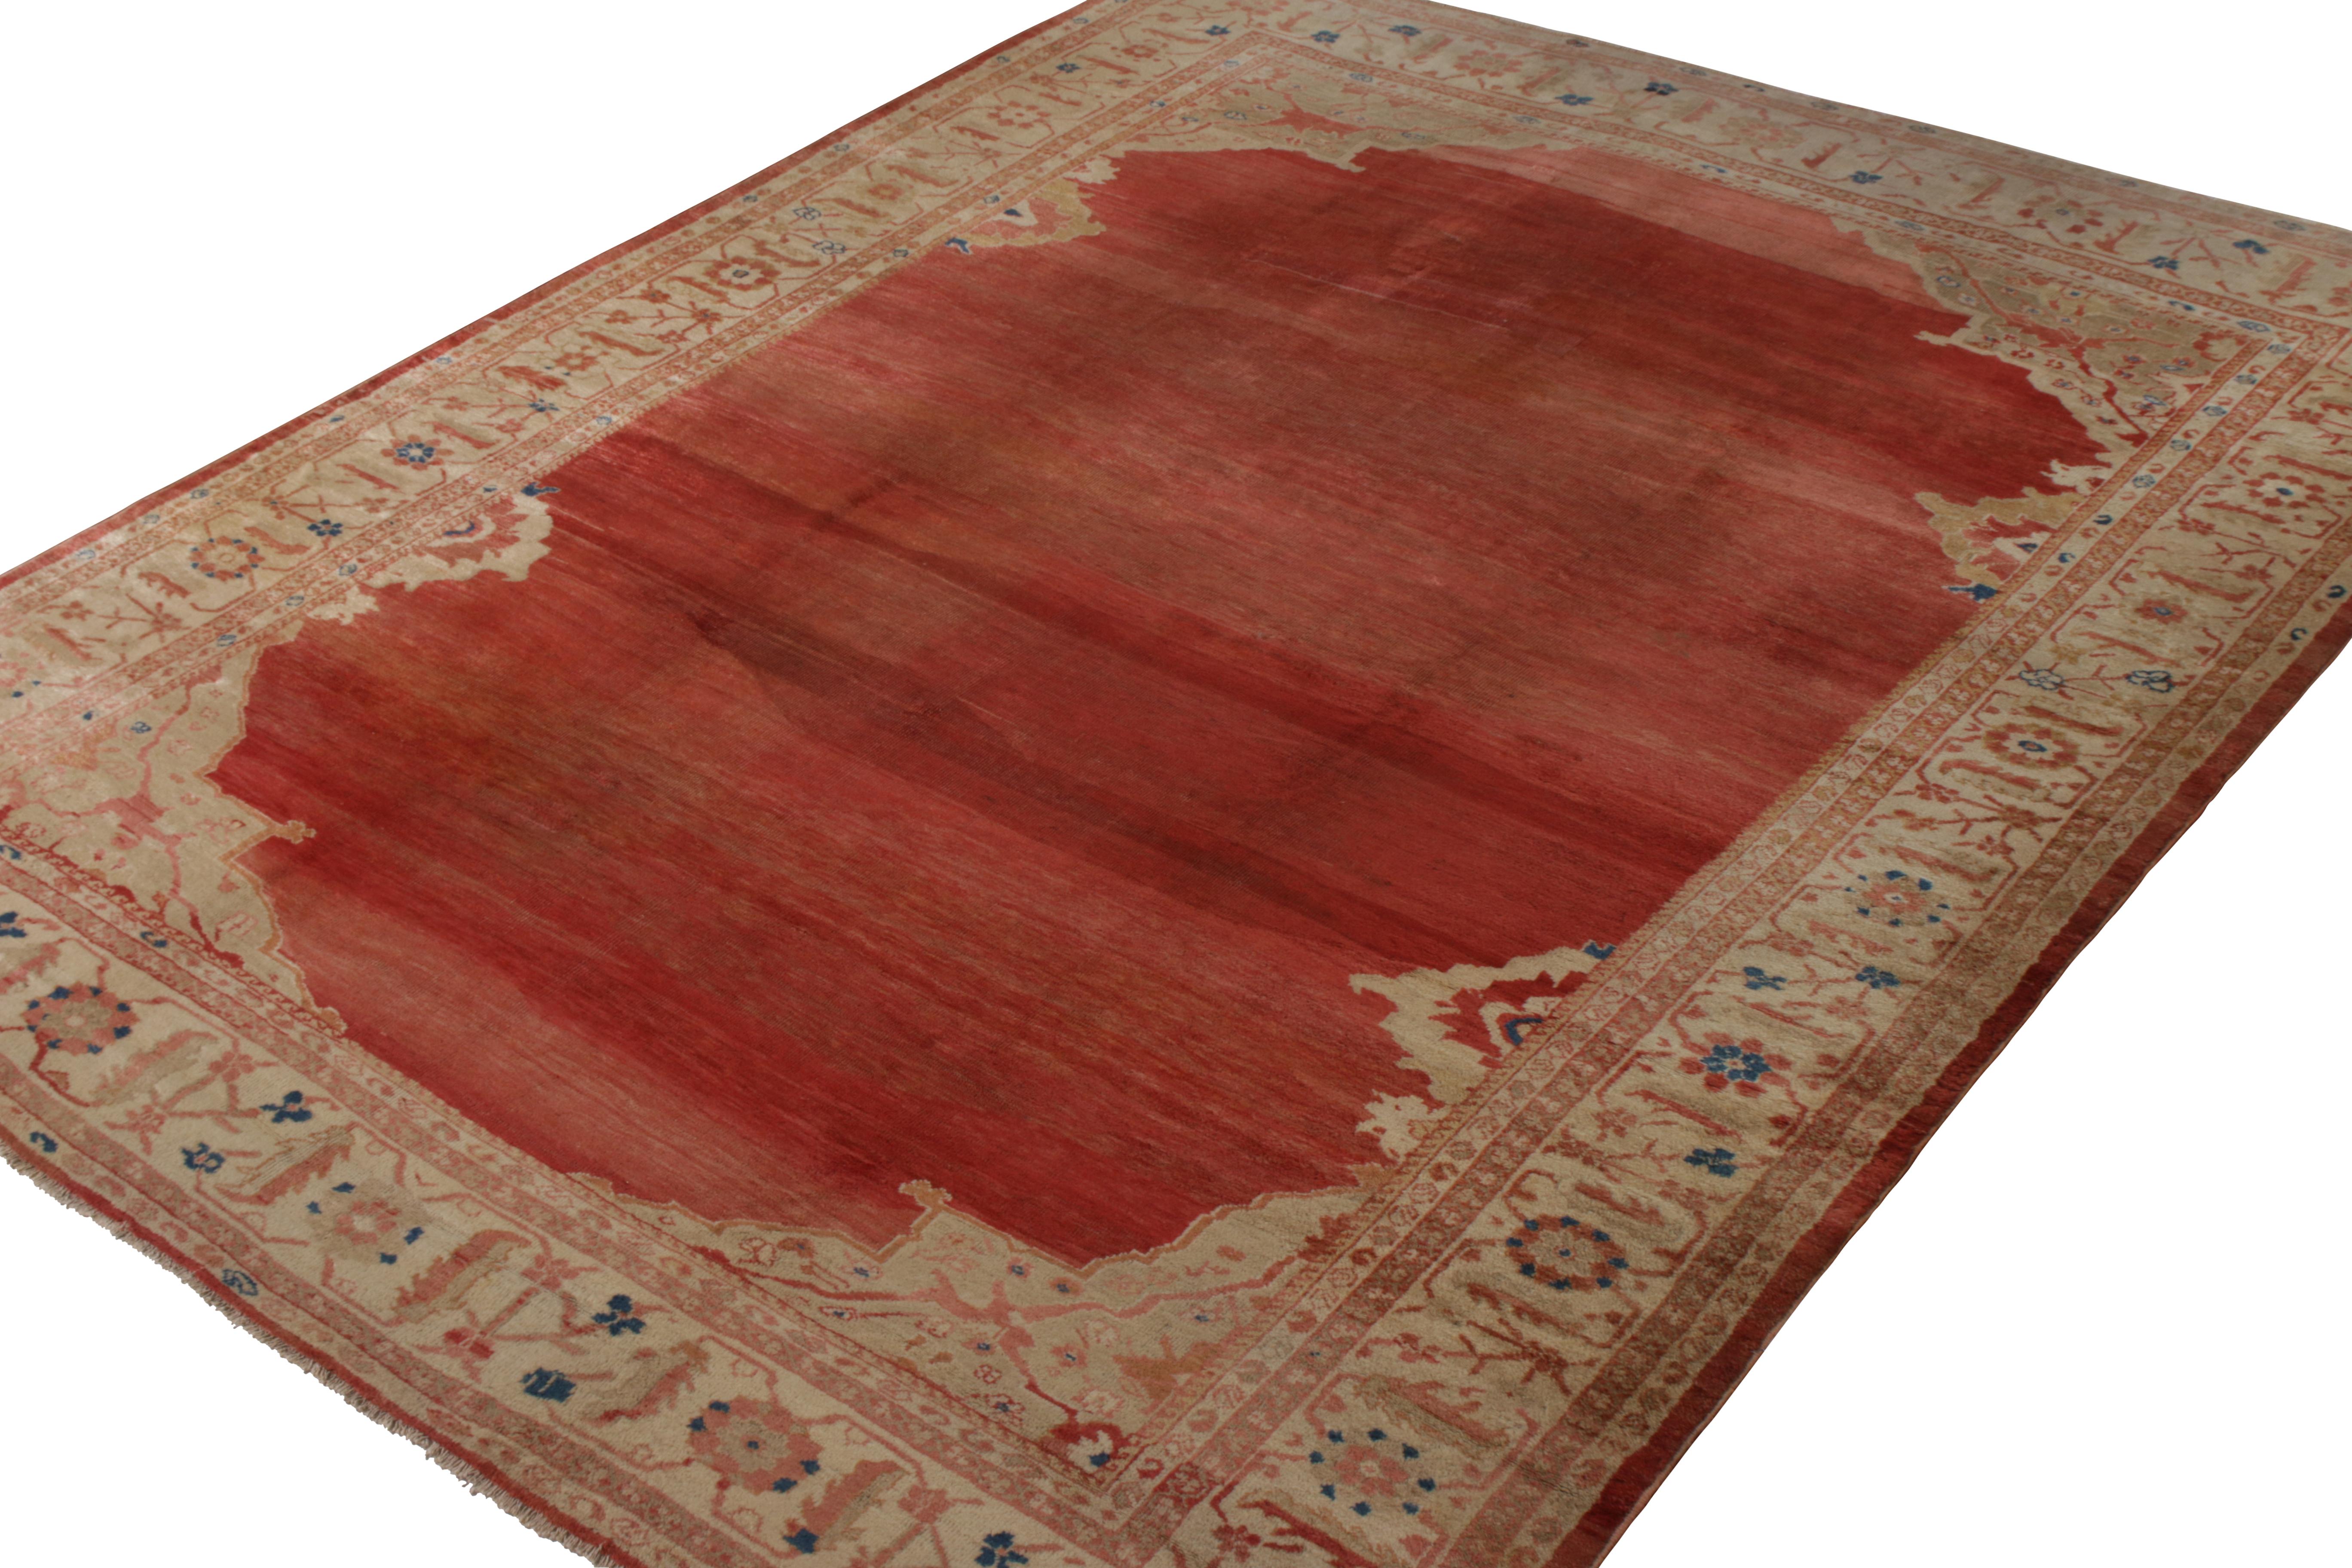 A 10x13 antique Persian rug of Sultanabad origin and rare open-field design in red and beige-brown. Hand knotted in wool circa 1880-1890, enjoying good condition for an antique Sultanabad rug of this age and distinction. 

Further on the design: